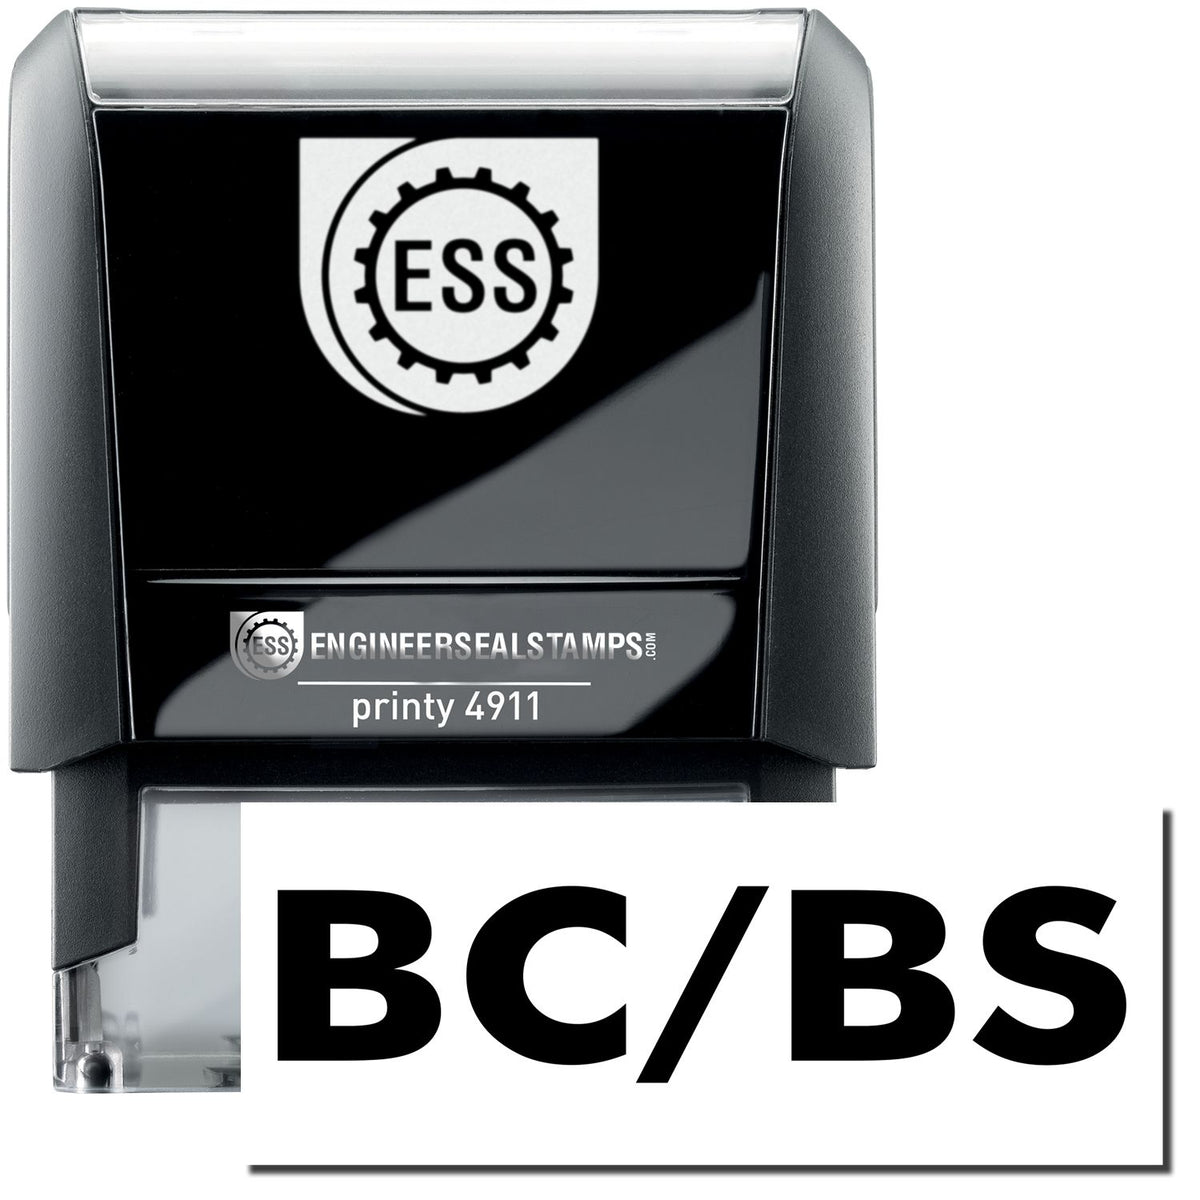 A self-inking stamp with a stamped image showing how the text &quot;BC/BS&quot; is displayed after stamping.